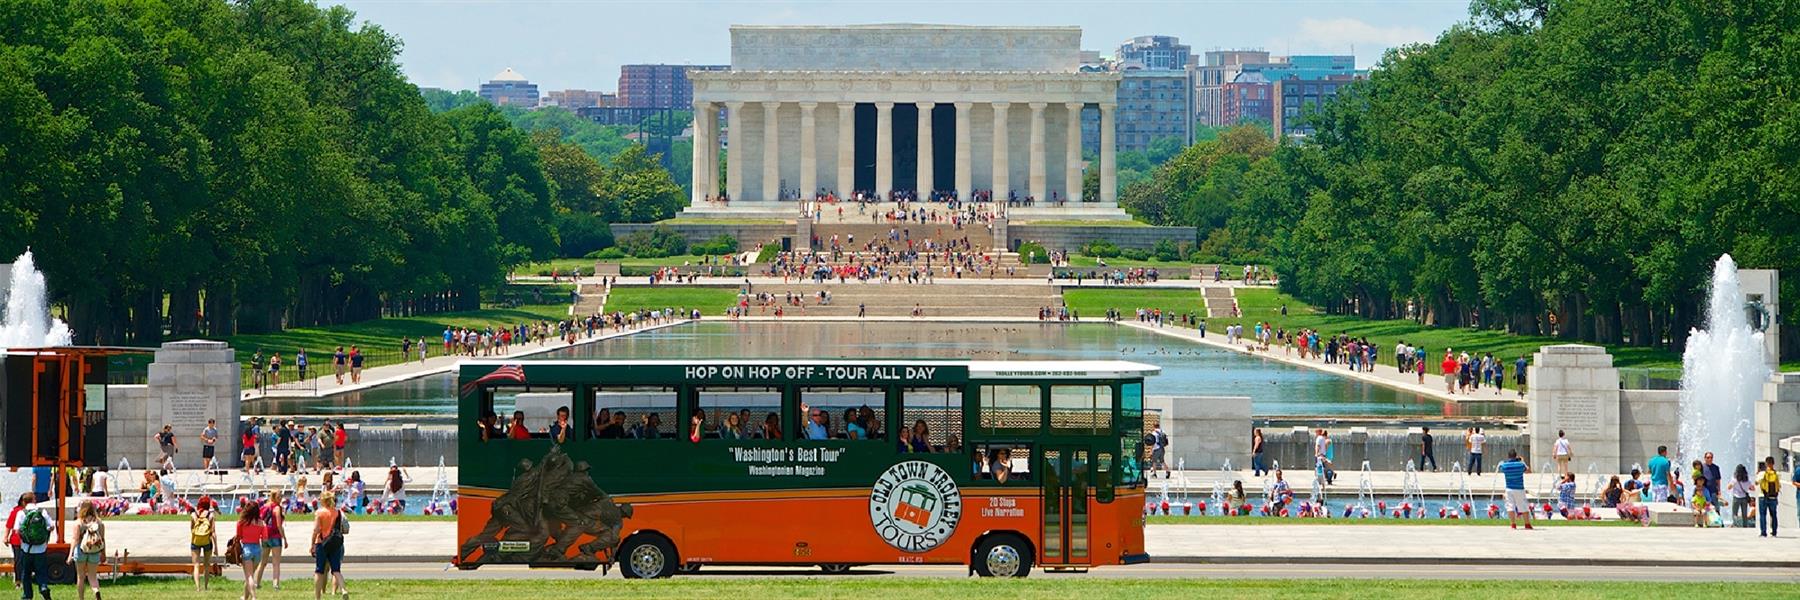 Washington DC Old Town Trolley Tours: Hop-On Hop-Off in Washington, District of Columbia